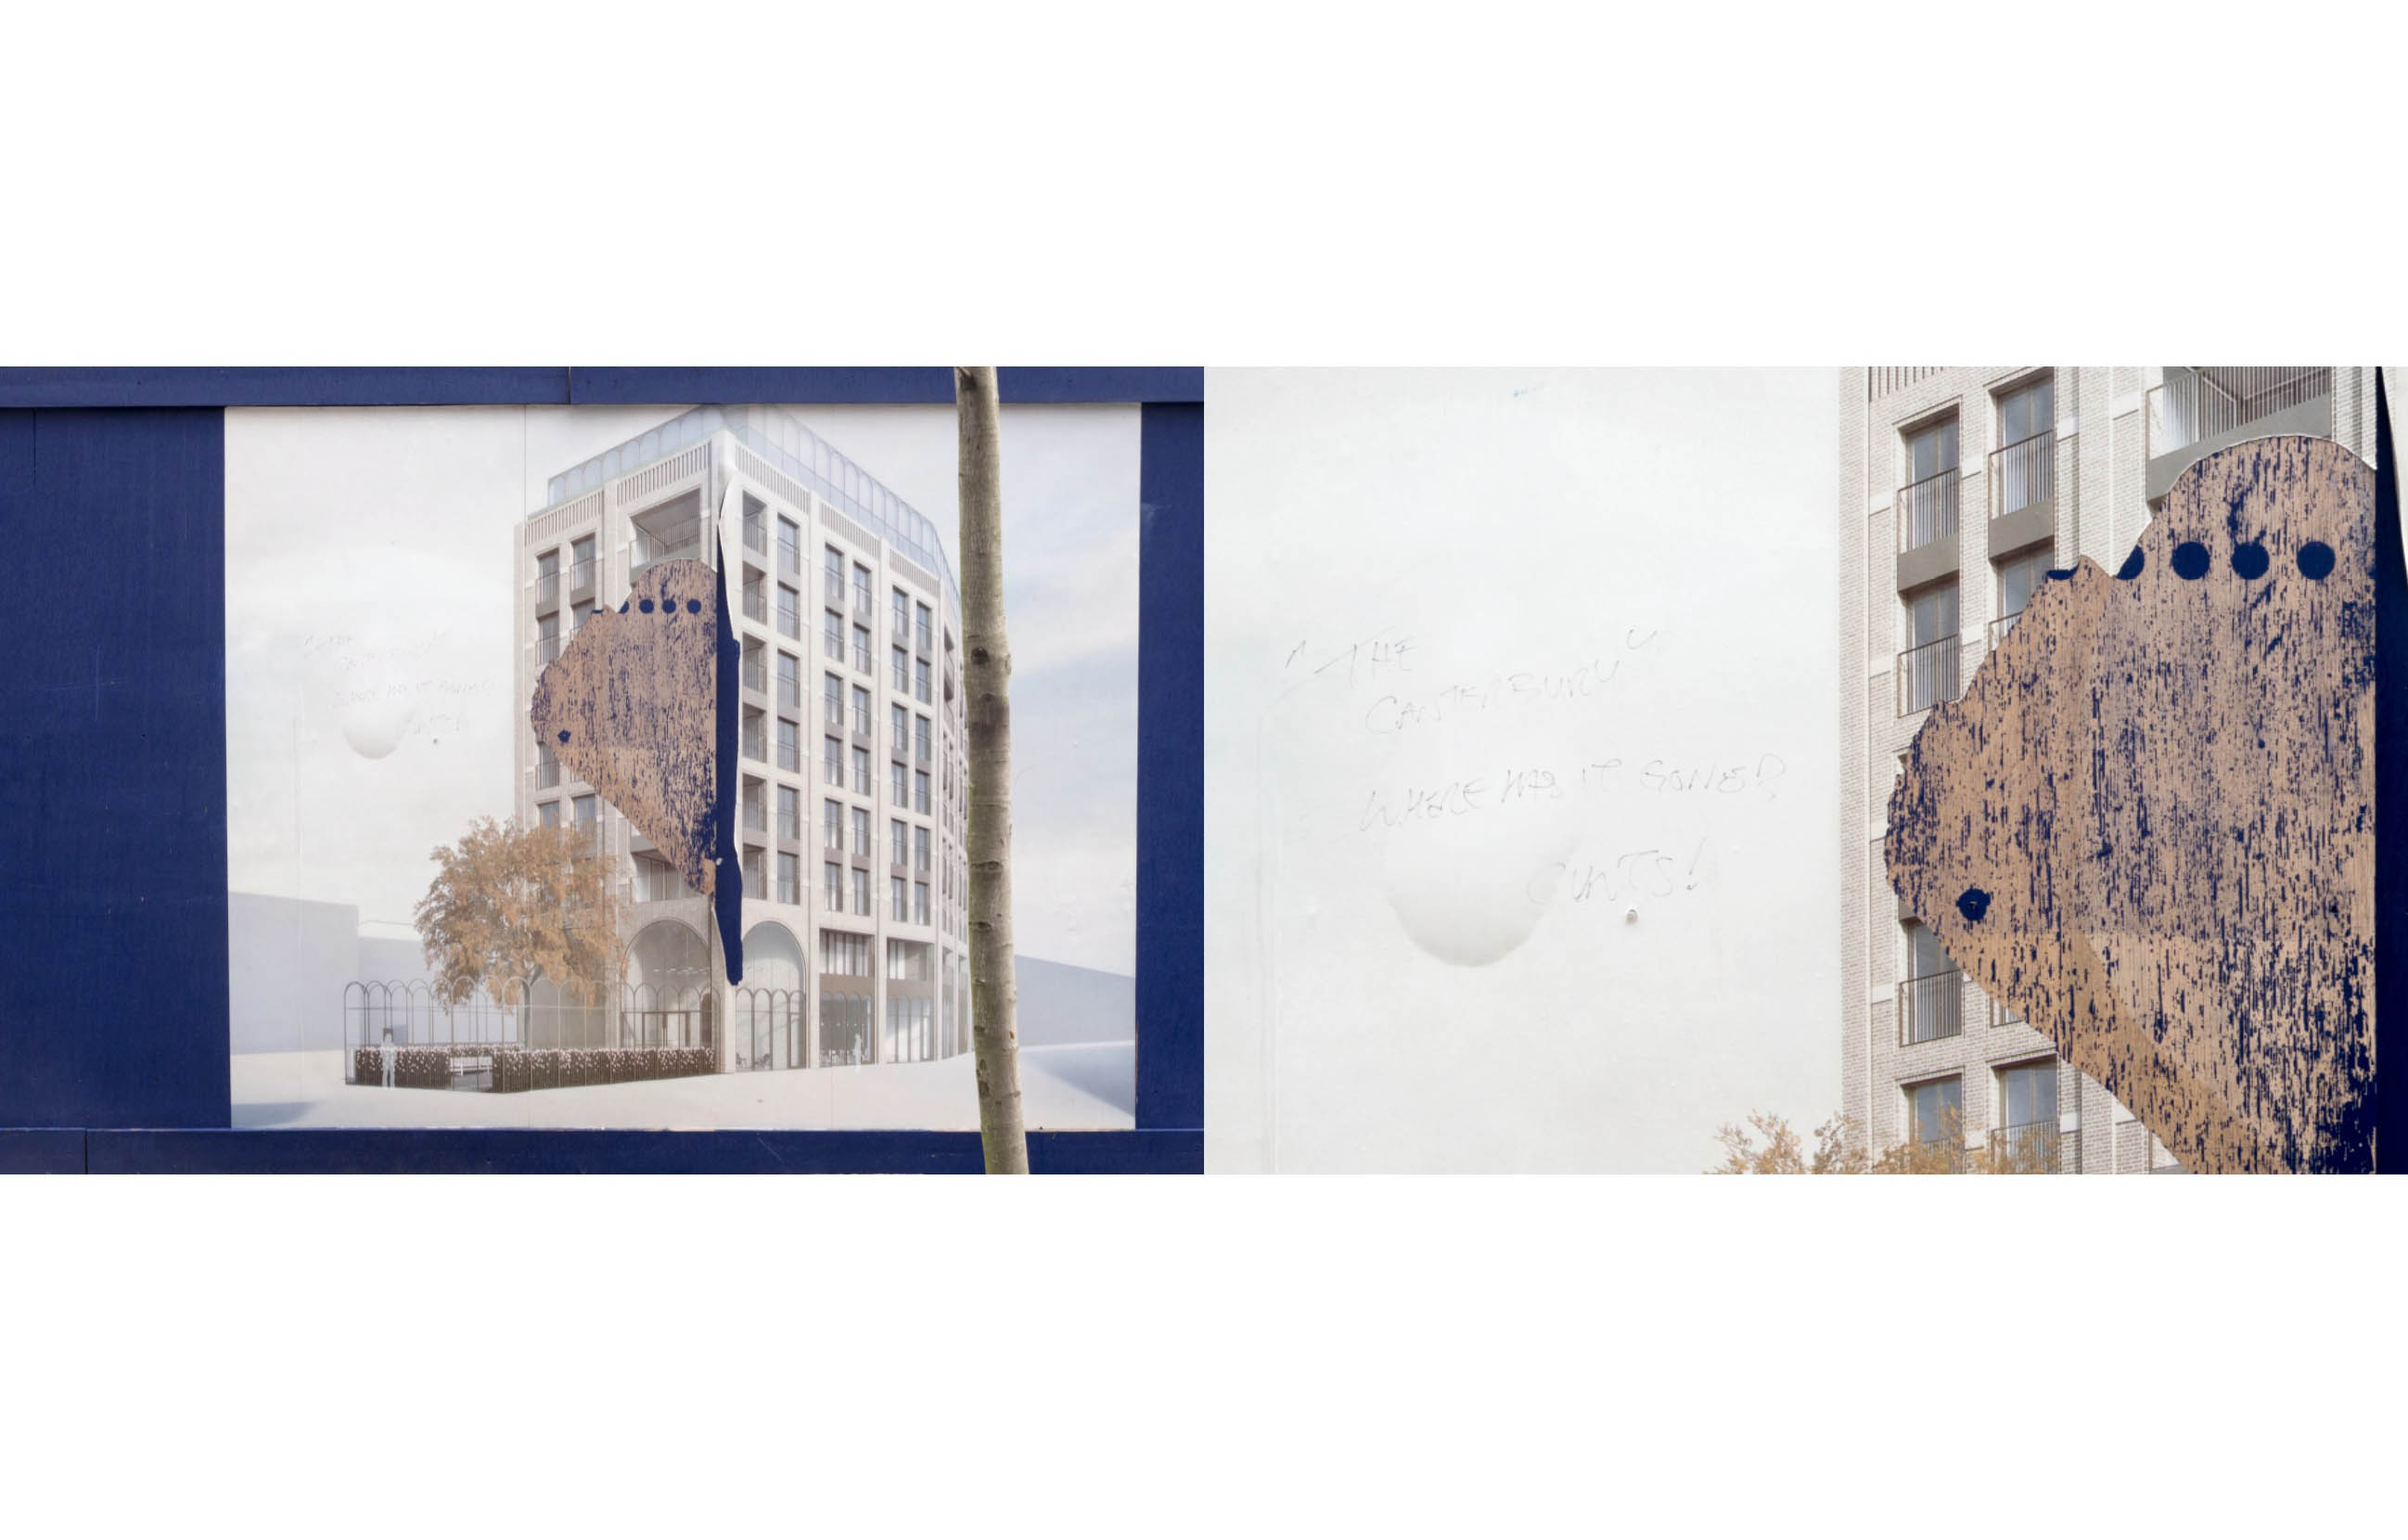 two photos of an architectural mockup of a planned building with part of the image ripped away, someone has written in felt tip pen - The Canterbury Where has it gone? Cunts!